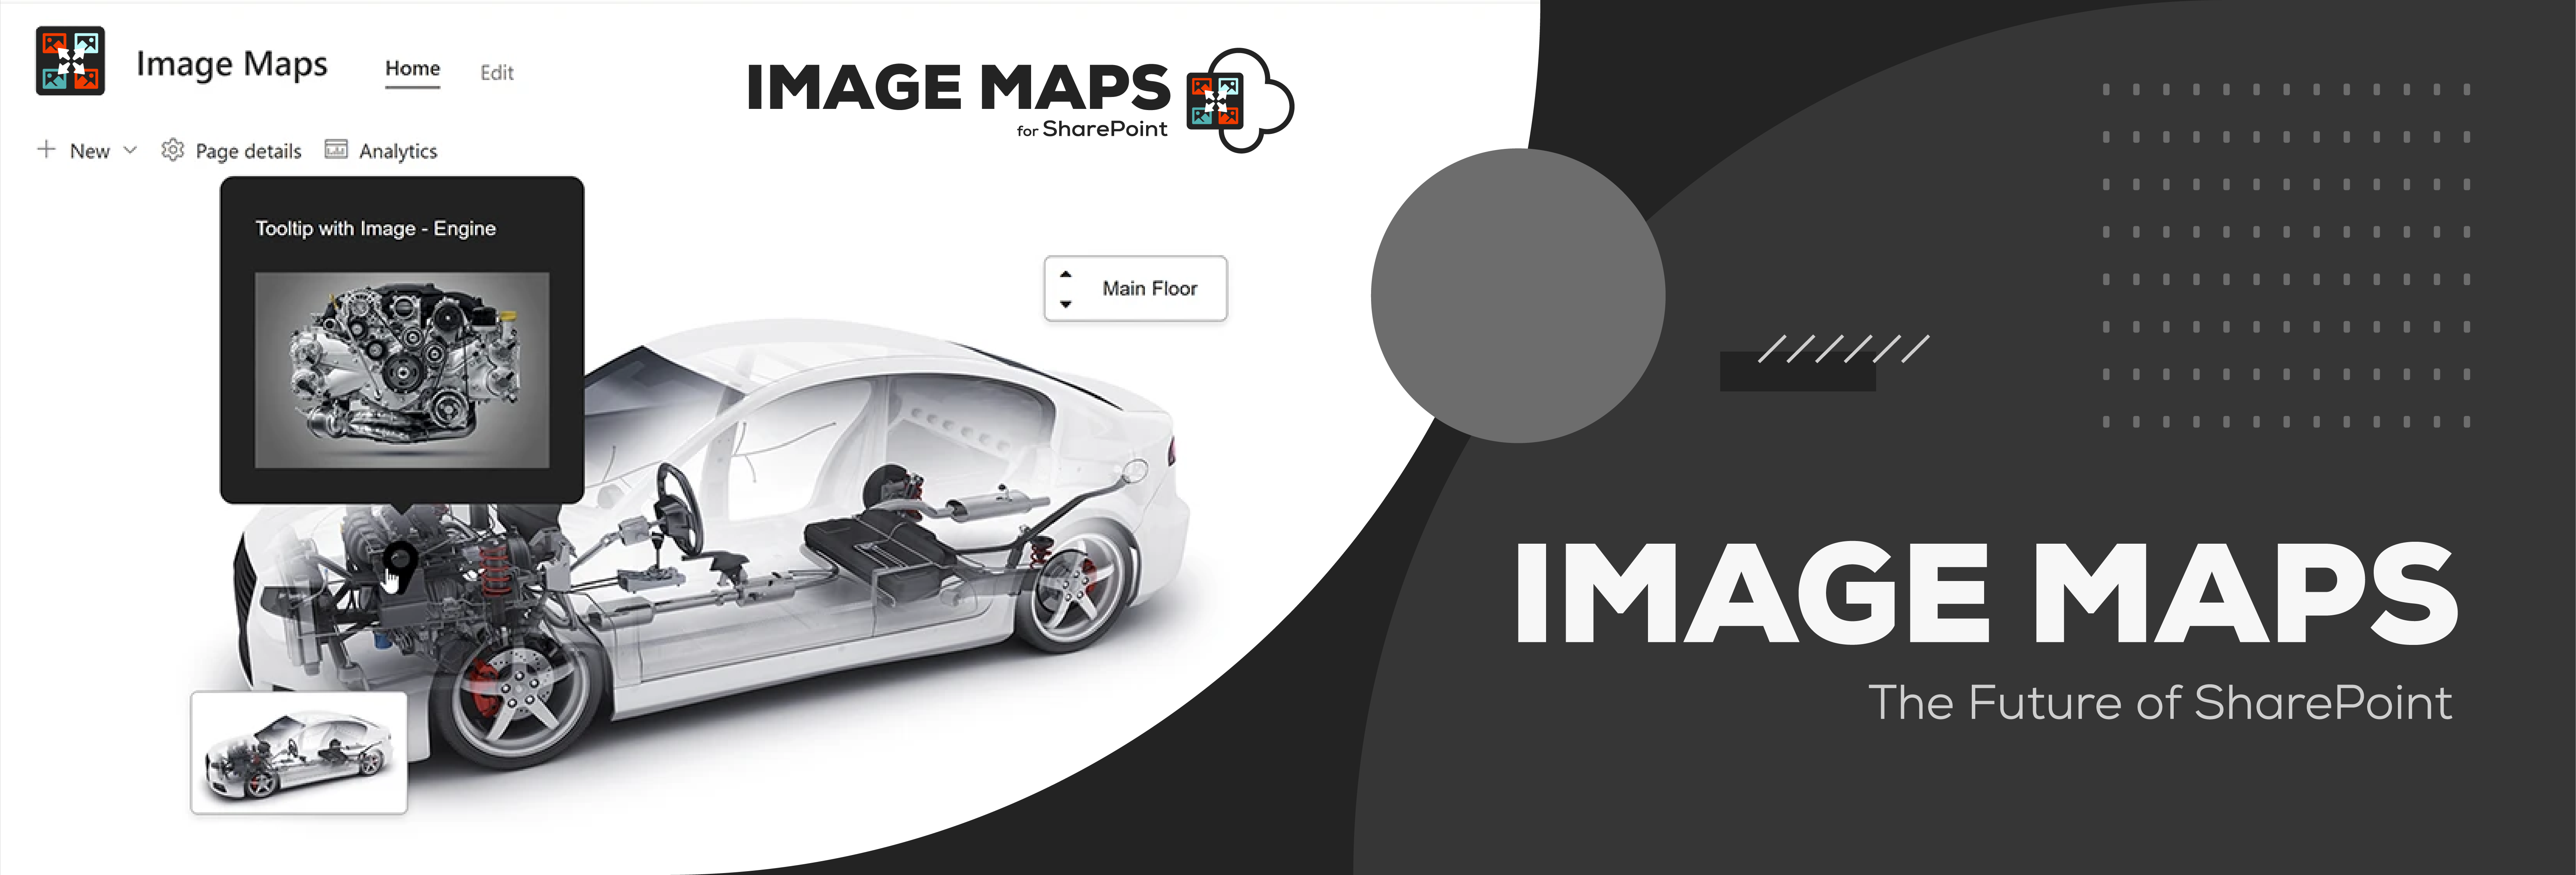 Image Maps for SharePoint